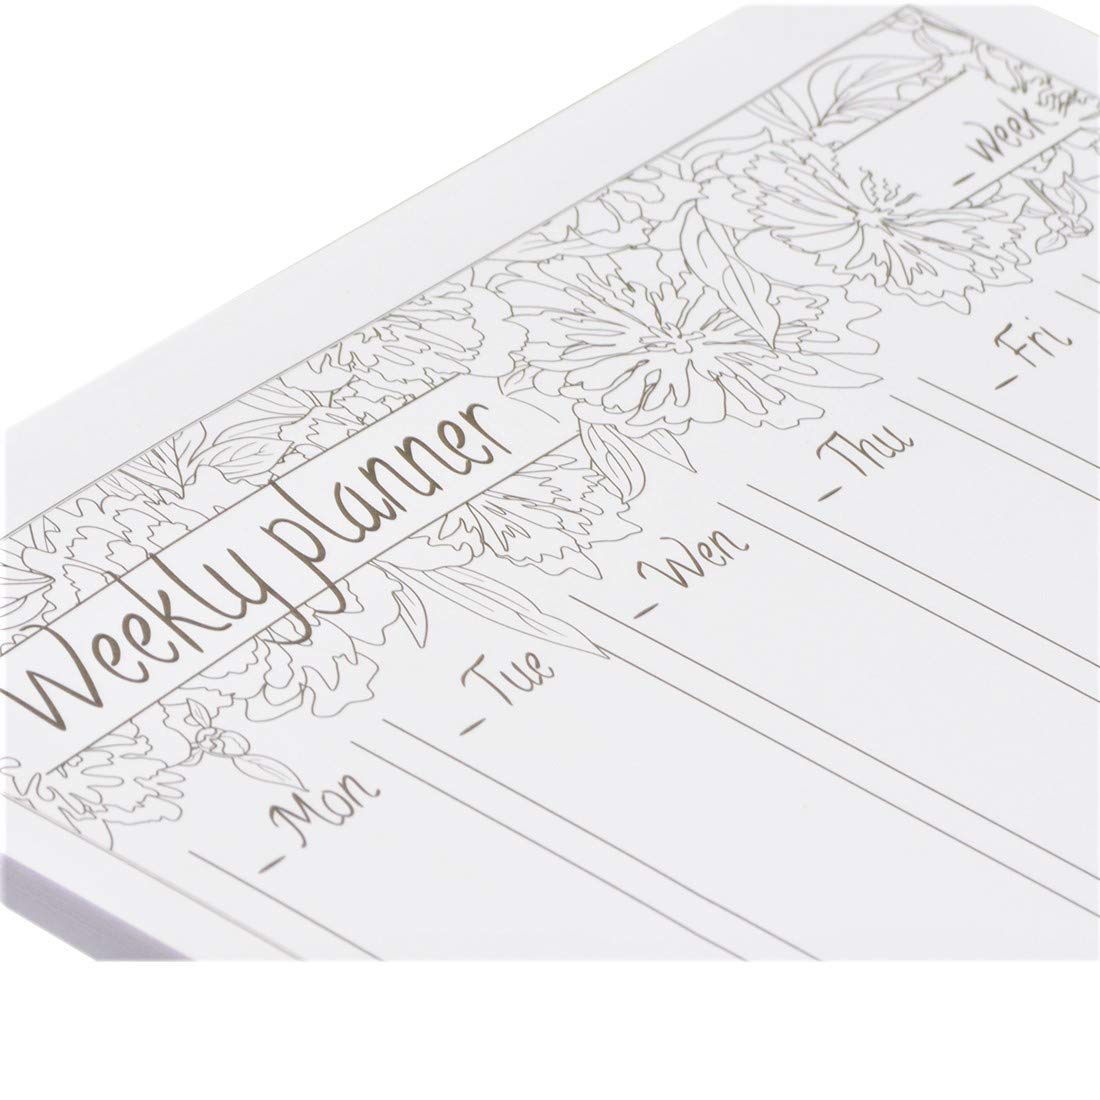 DOODLING UNDATED Desk PAD| Calendar for Writing| Paper| Tear-Off Sheets for Dates & Notes| Daily Planner & Weekly Overview